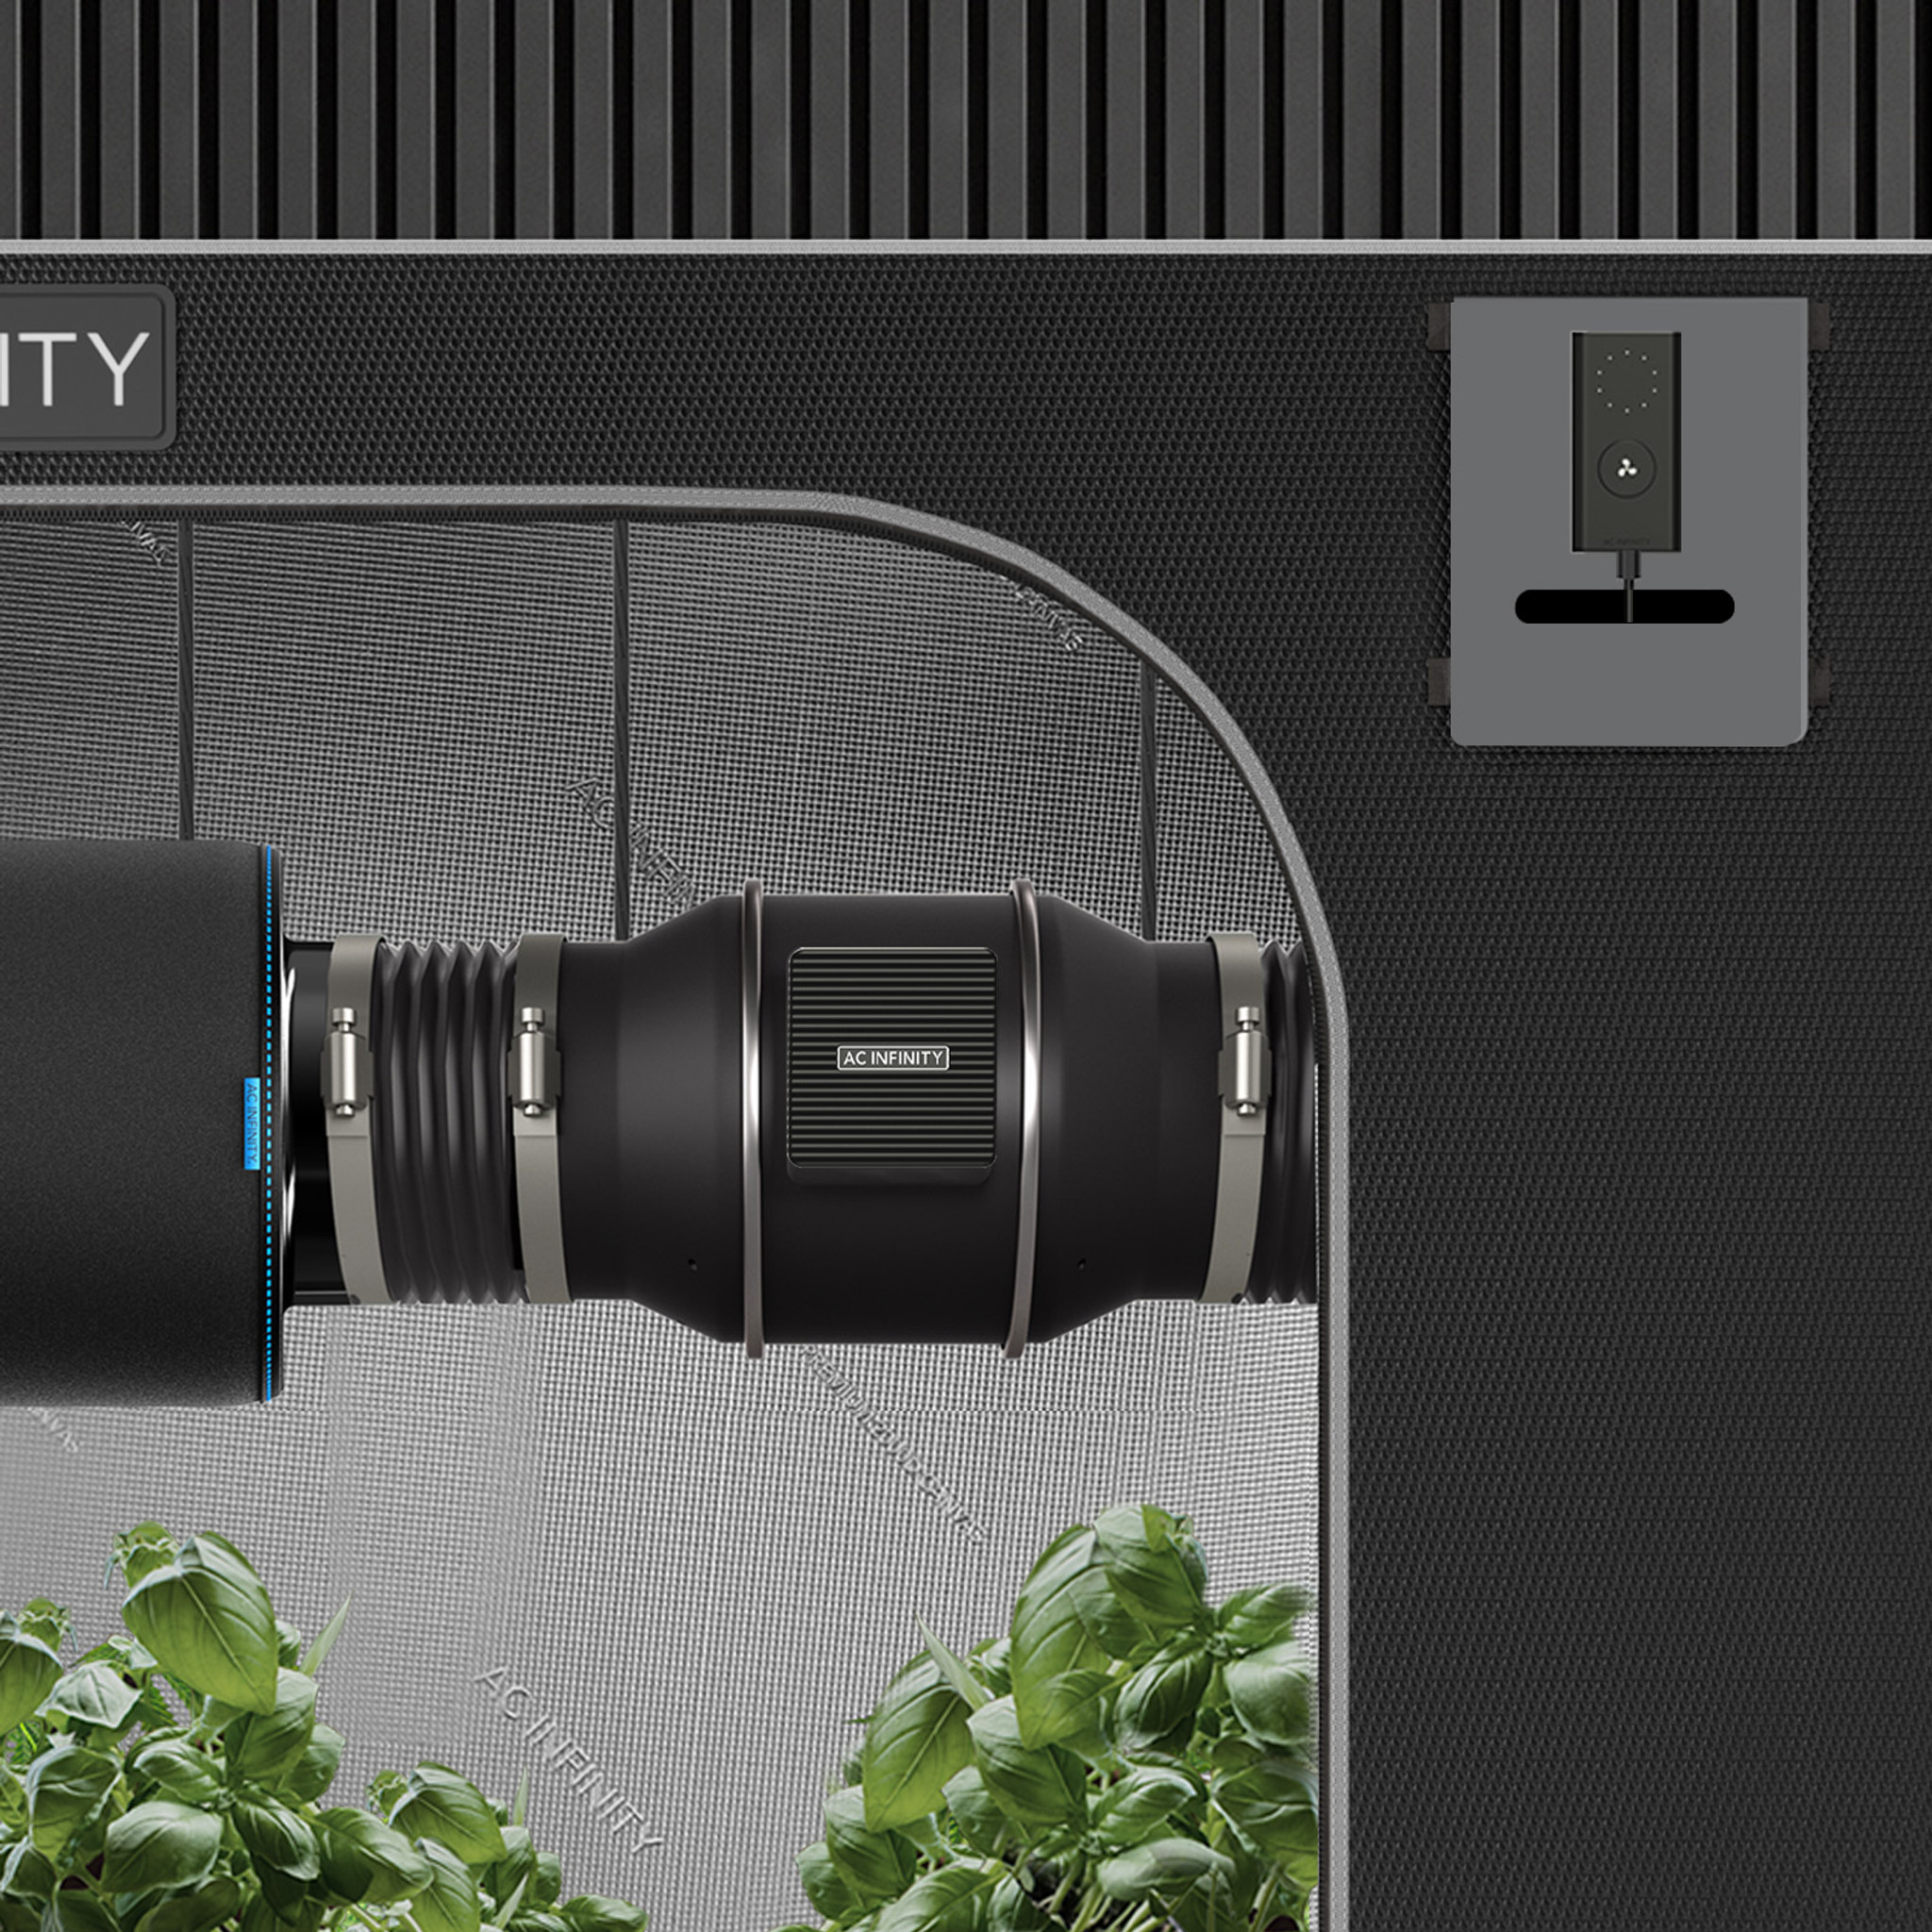 V4 - Complete 4 inch Ventilation kit with Cloudline AC Infinity fan - T4  with auto temp/humidity controller. - PA Hydroponics